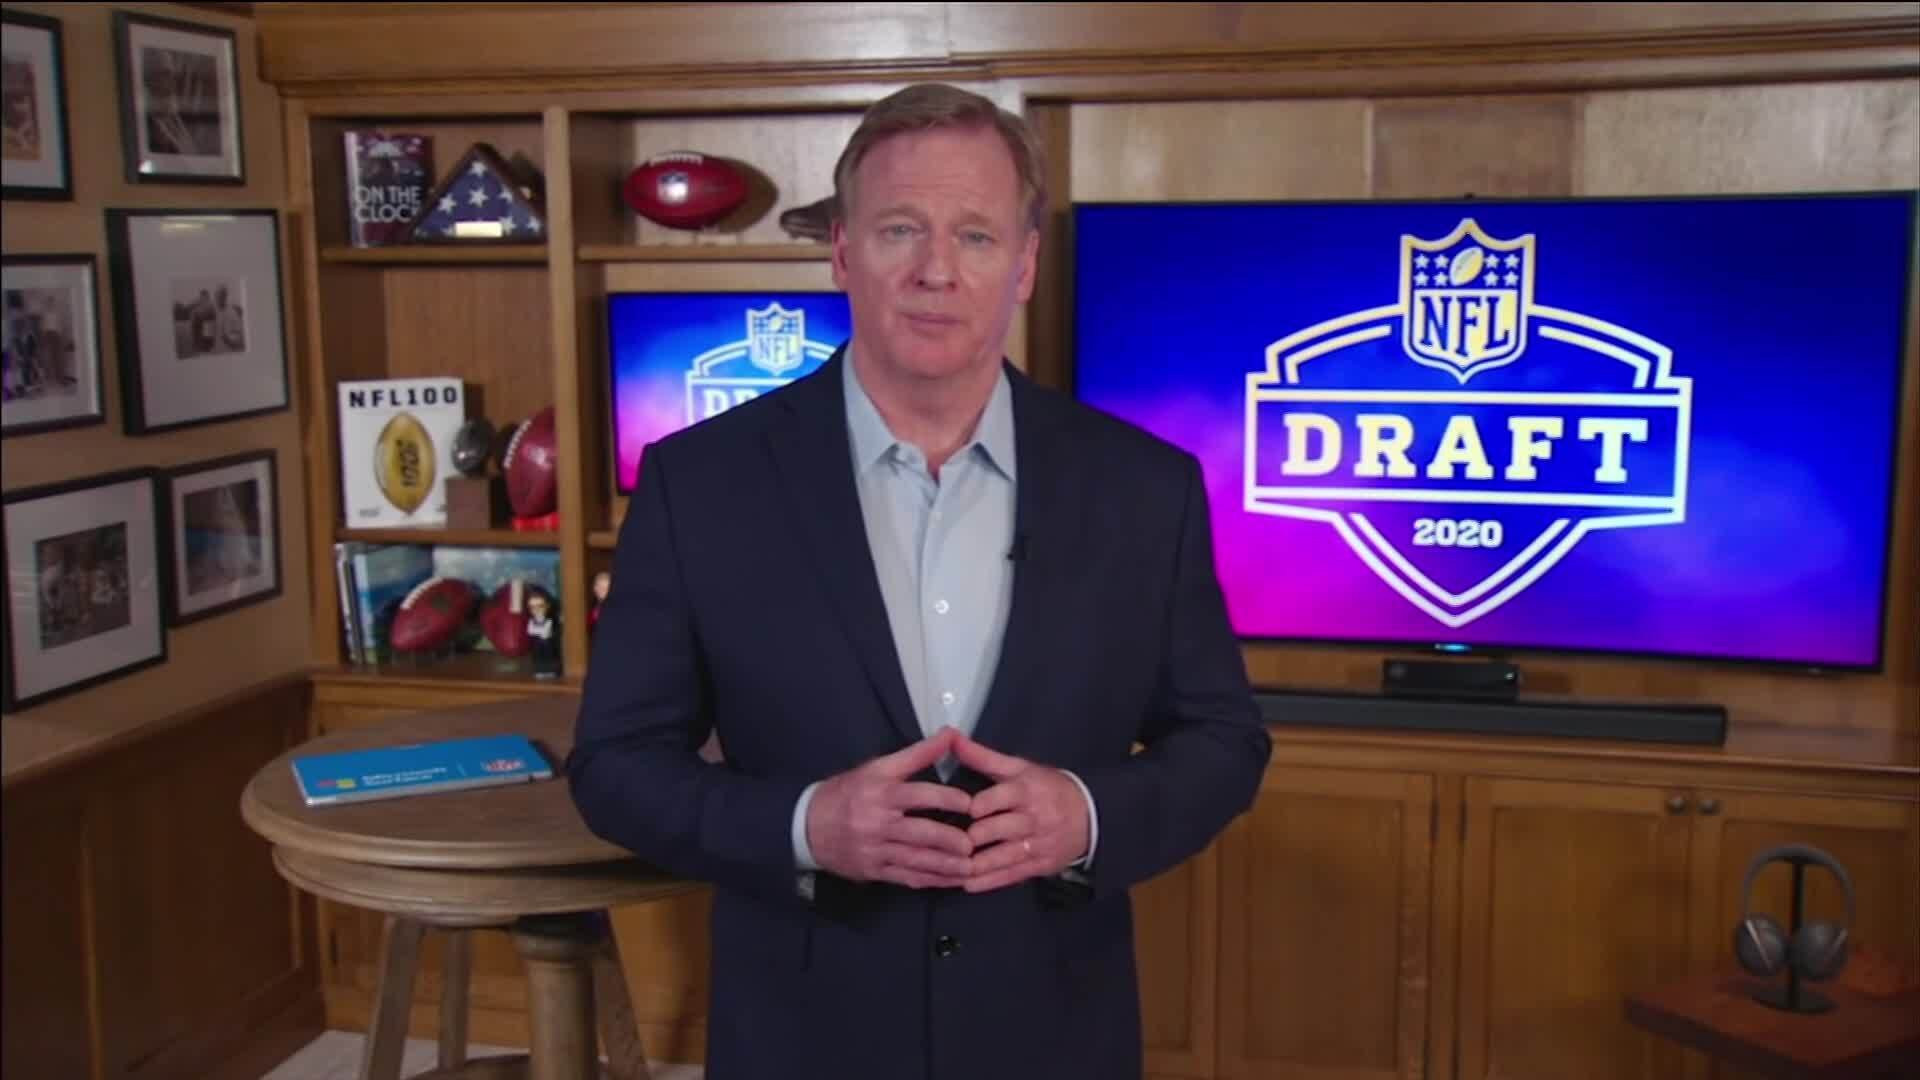 Commissioner Roger Goodell announced selections from the comfort of his own home ©NFL